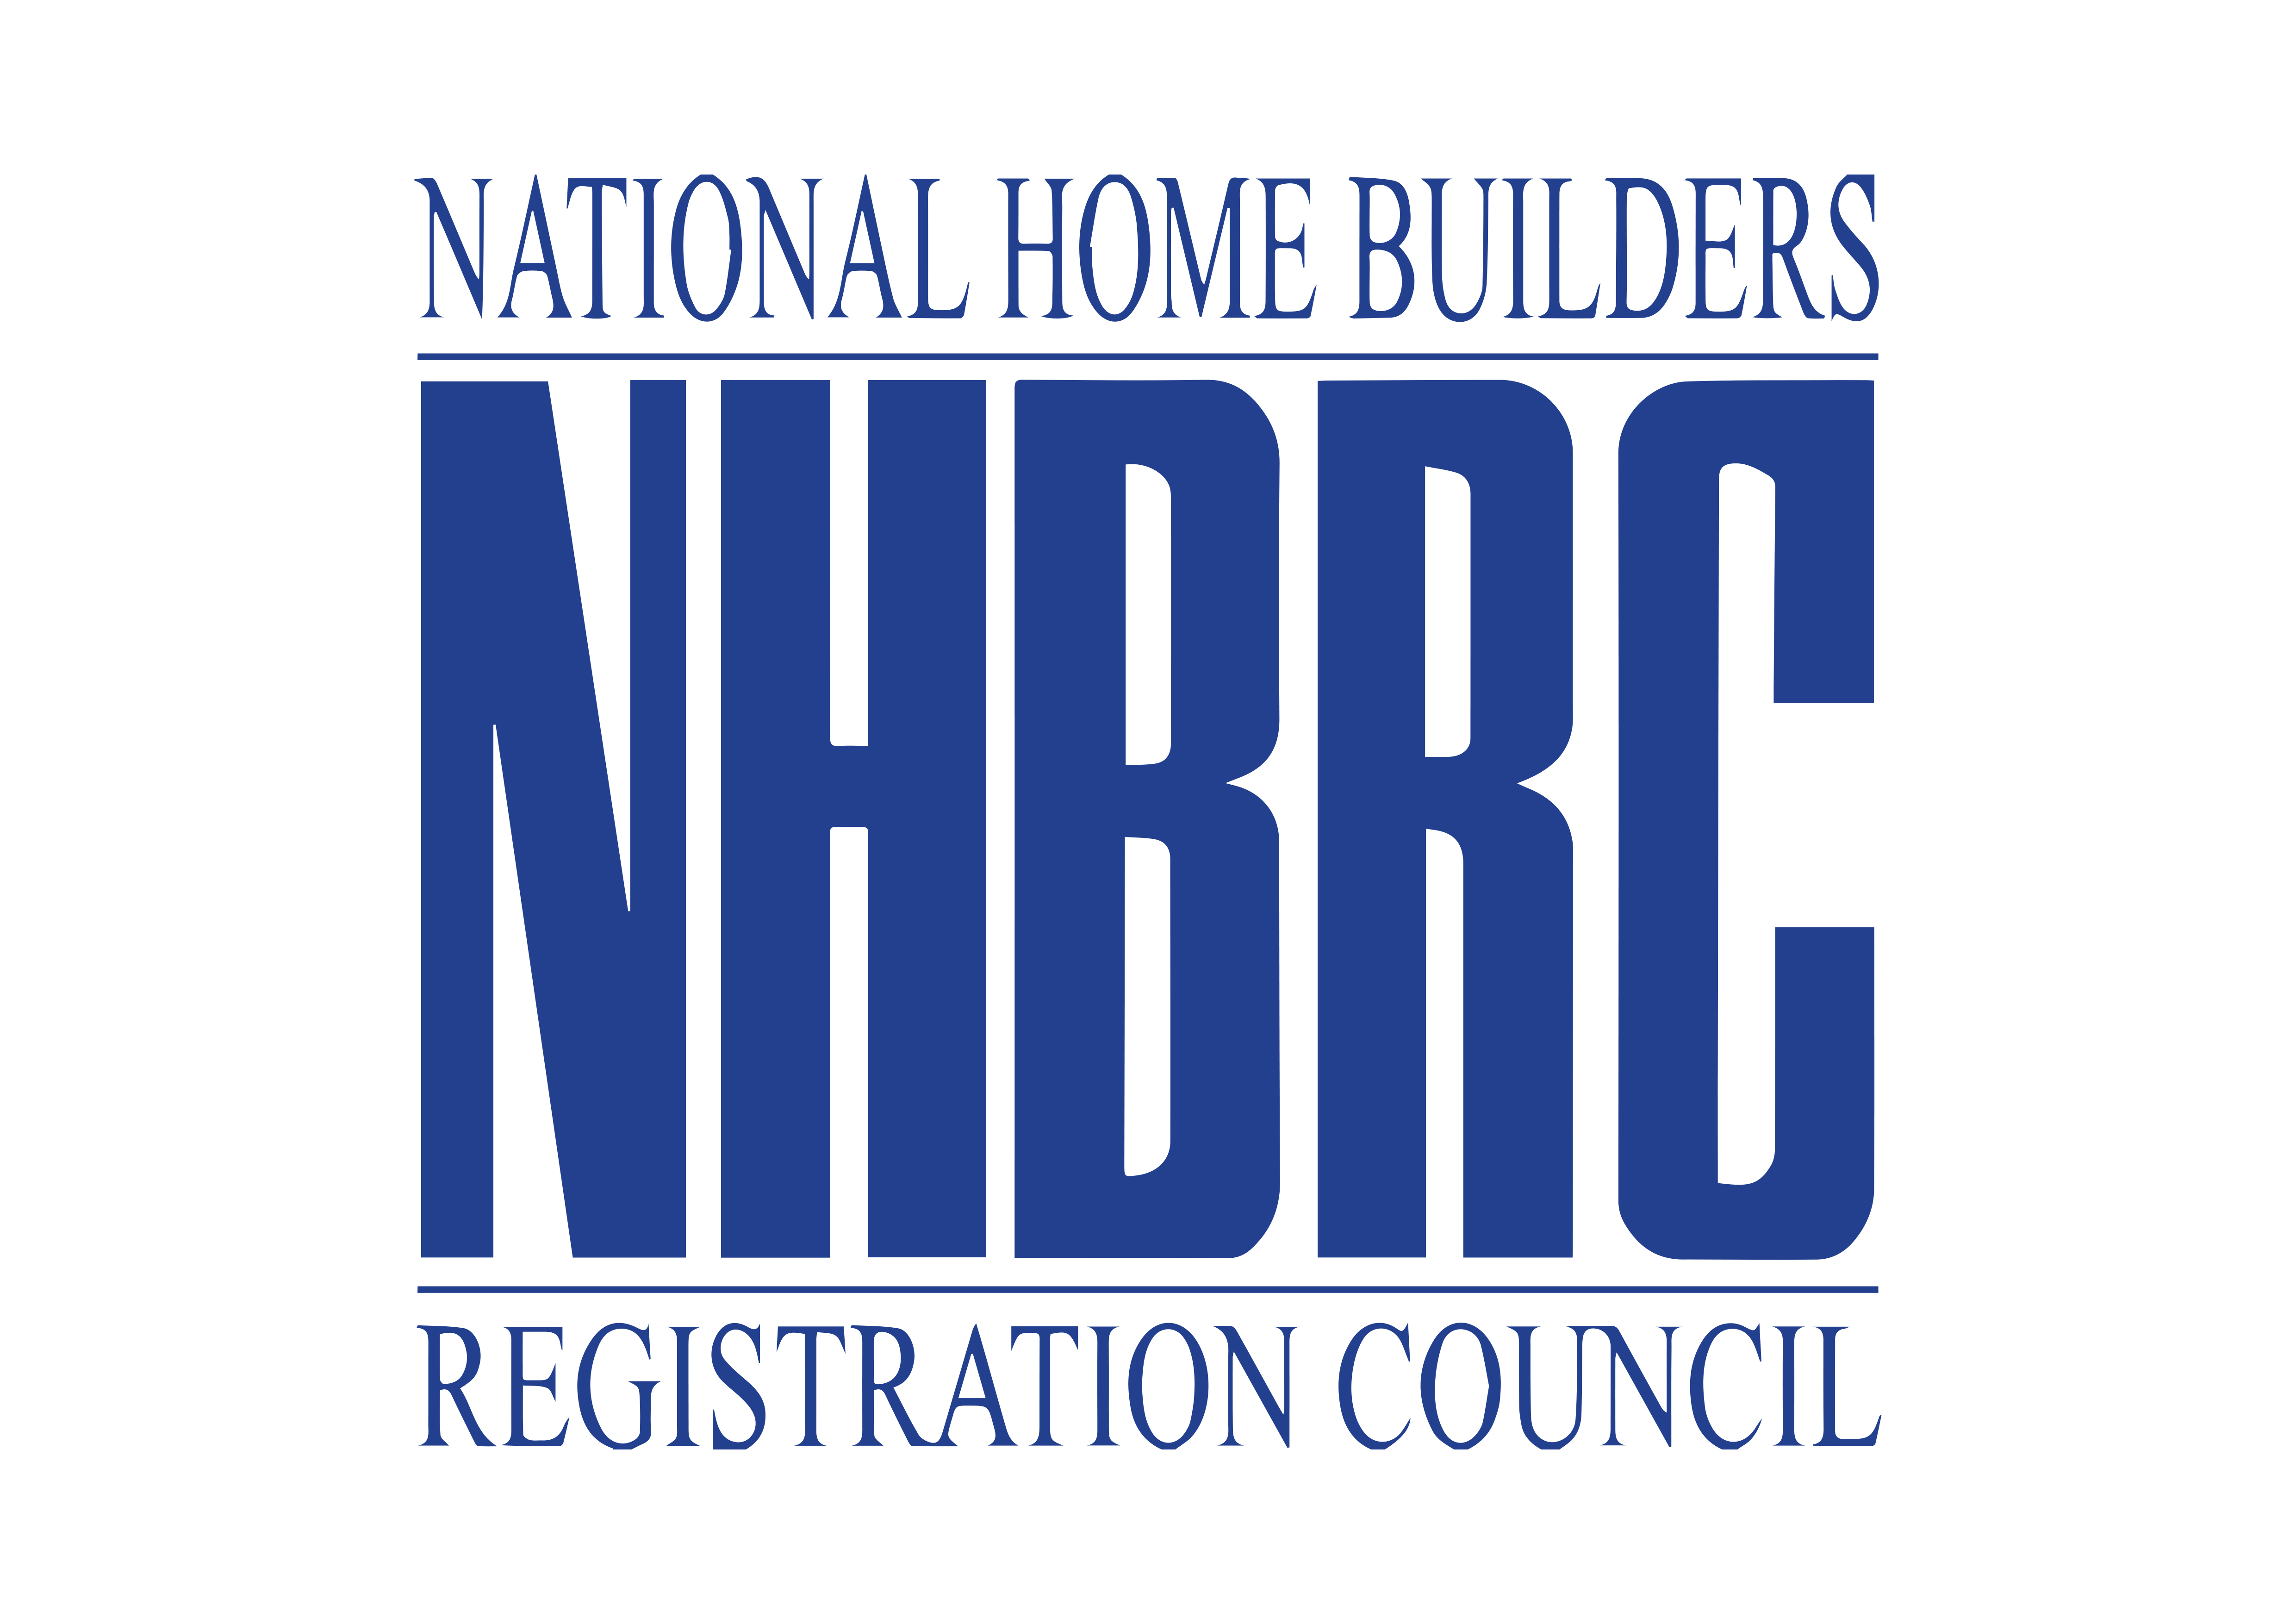 The National Home Builders Registration Council